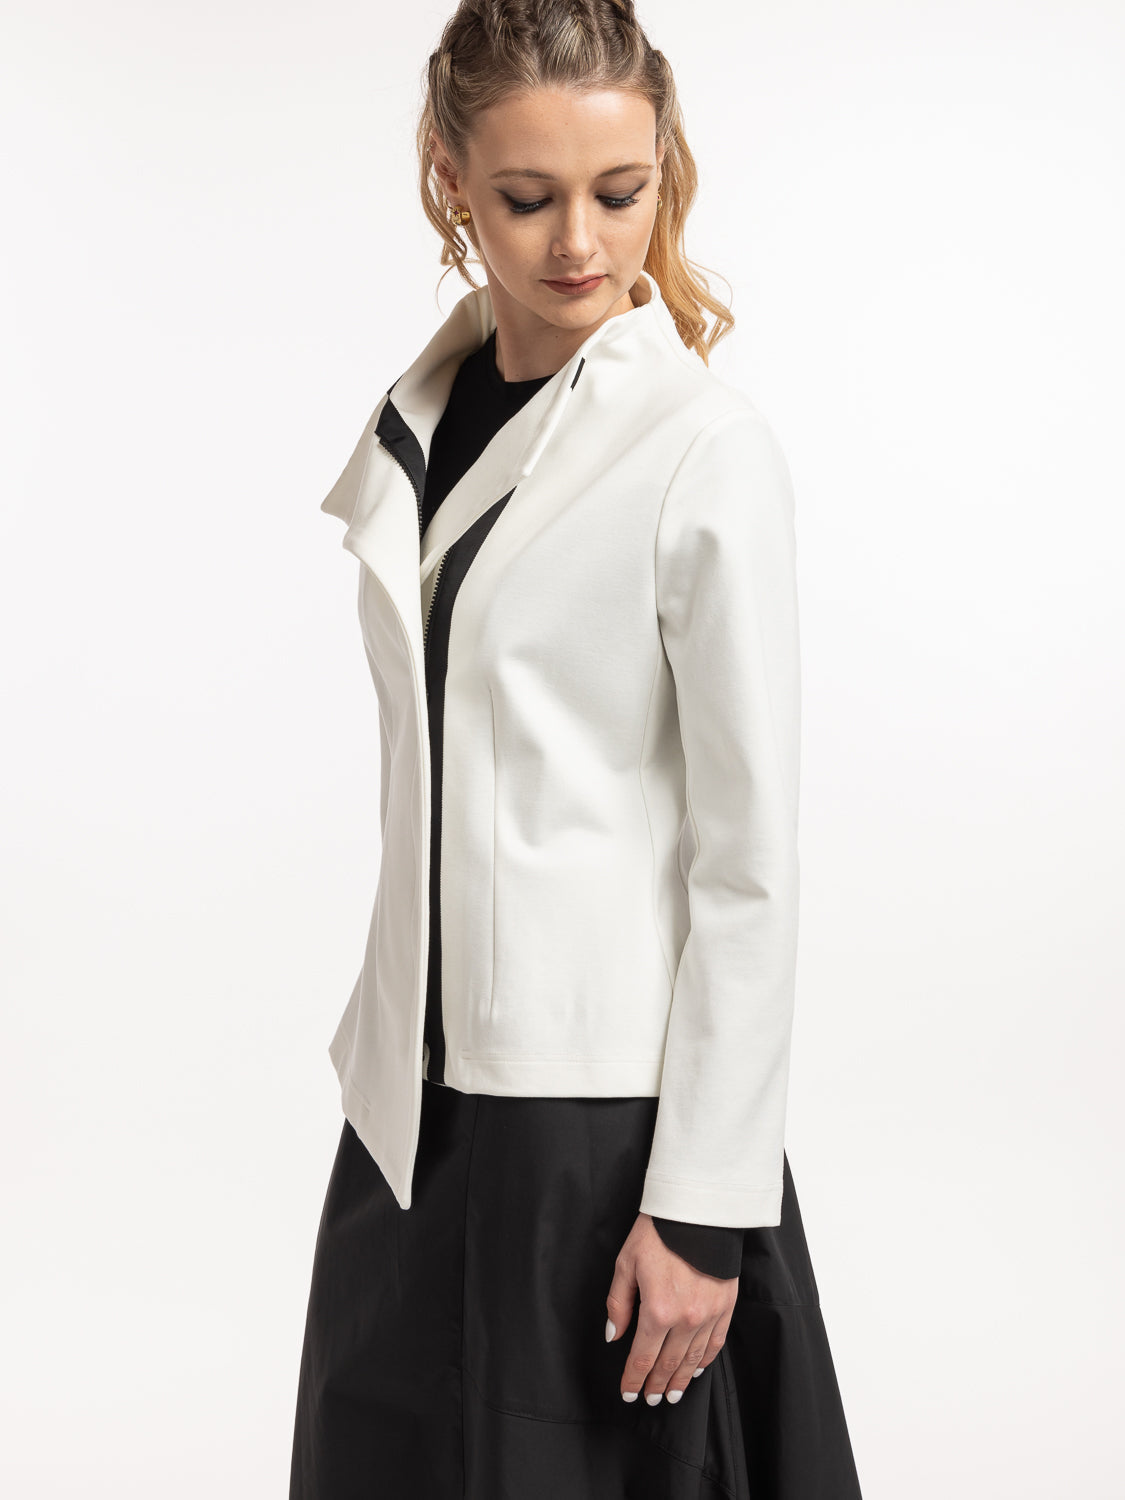 STYLE X LAB EXTENSION JACKET - IVORY - THE VOGUE STORE